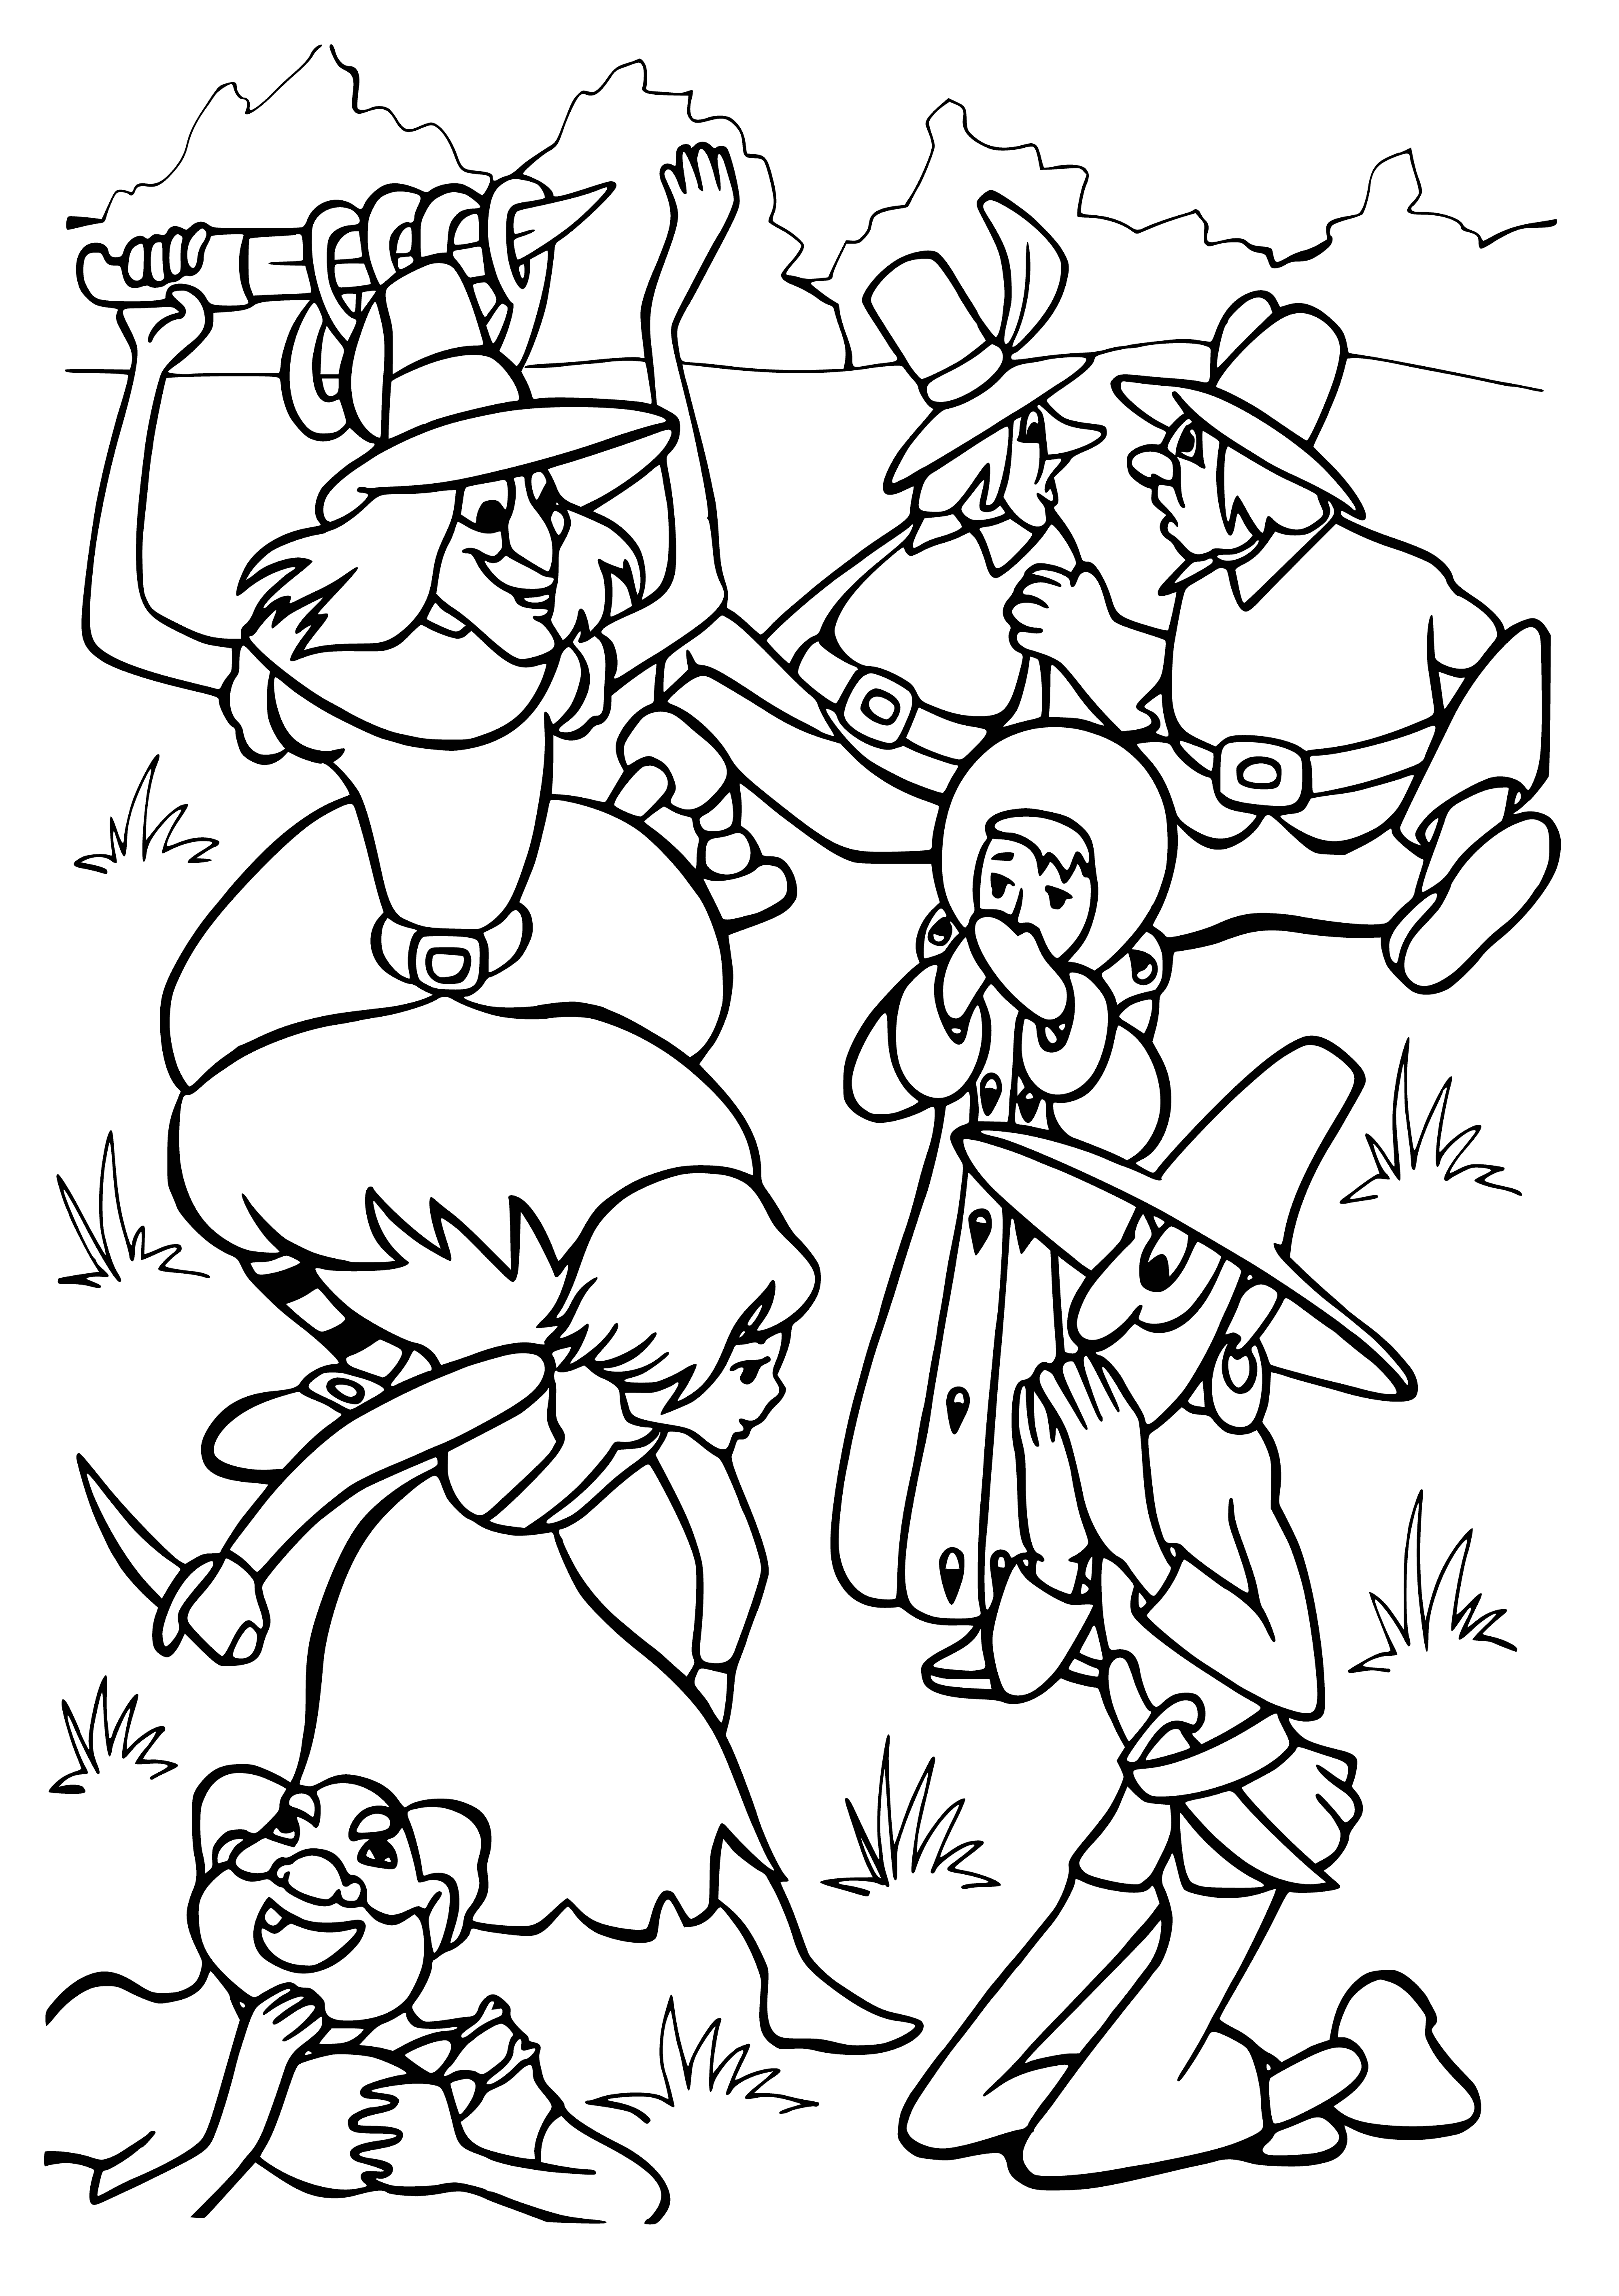 coloring page: 5 robbers (4 men, 1 women) w/ guns, money & a baby outside a large stone building.